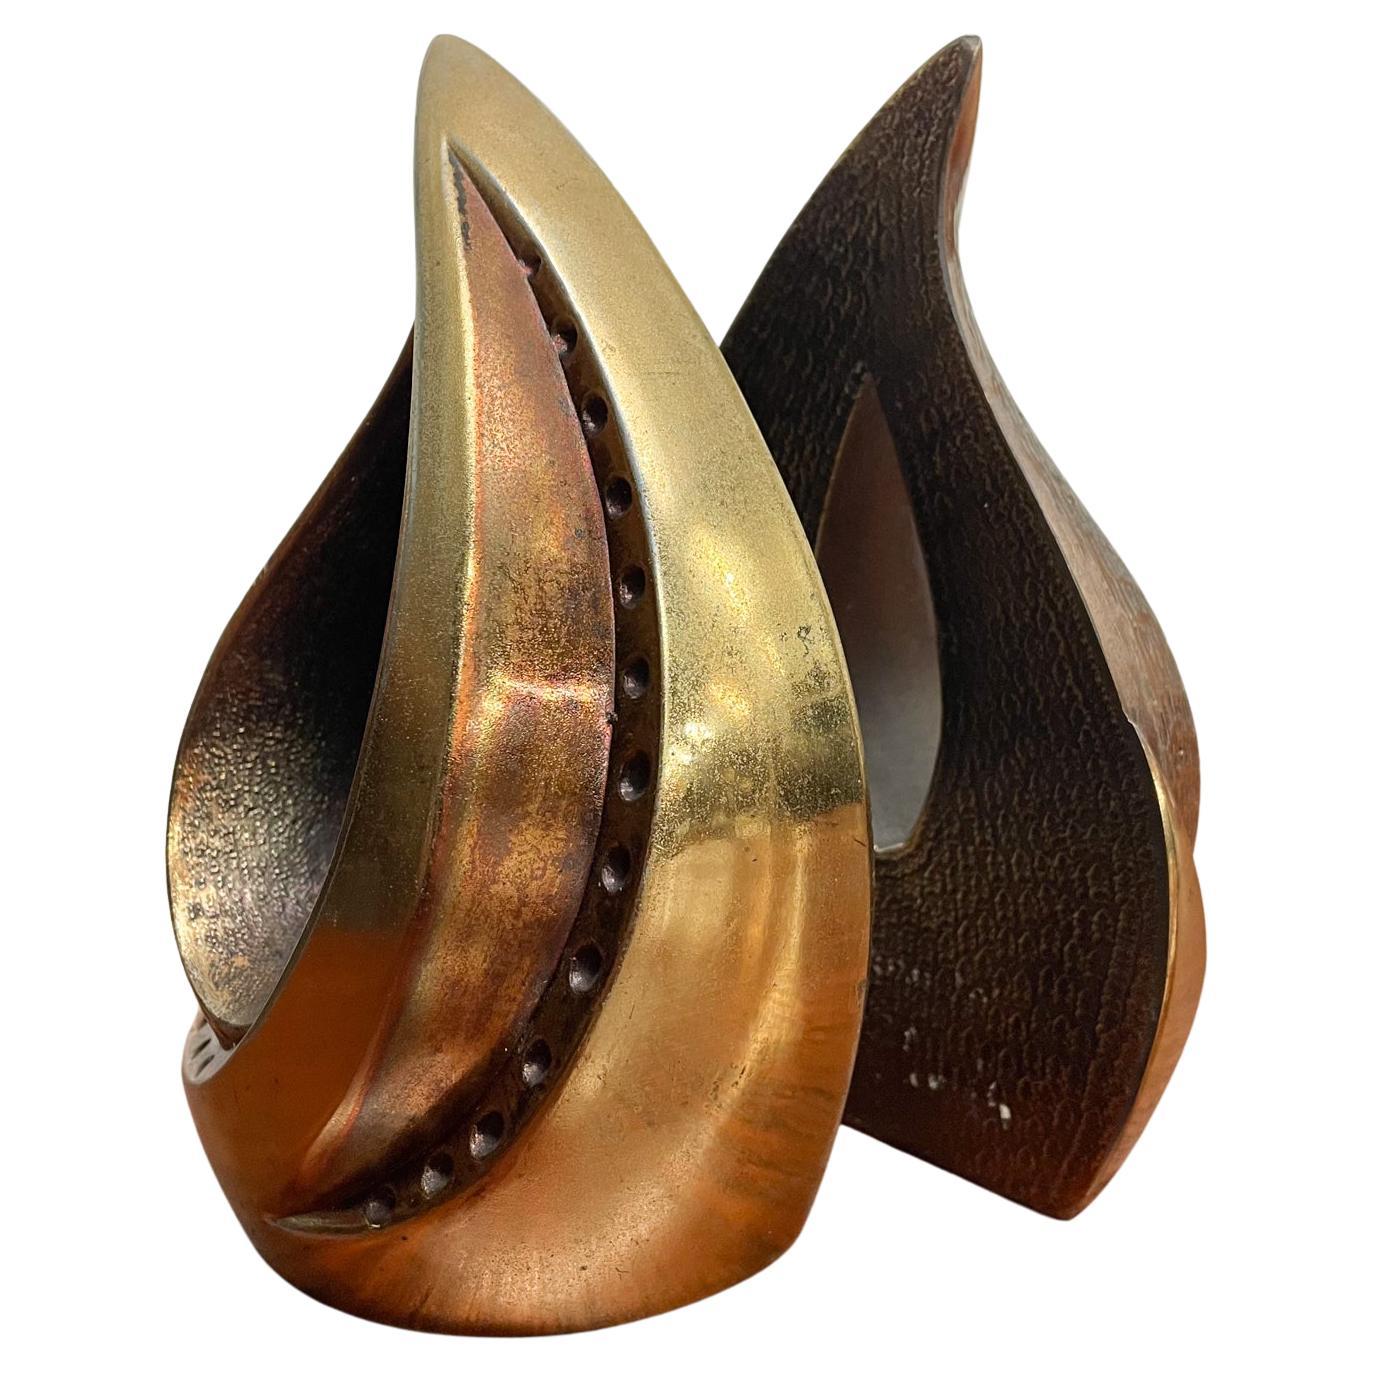 Bookends
Ben Seibel for Jenfred ware sculptural bookends modern tear drop flame 1950s
Made in brass
Measures: 6.5 H x 4.5 W x 2.5D inches
Original preowned vintage unrestored condition.
Refer to images.
We have more pieces!

  